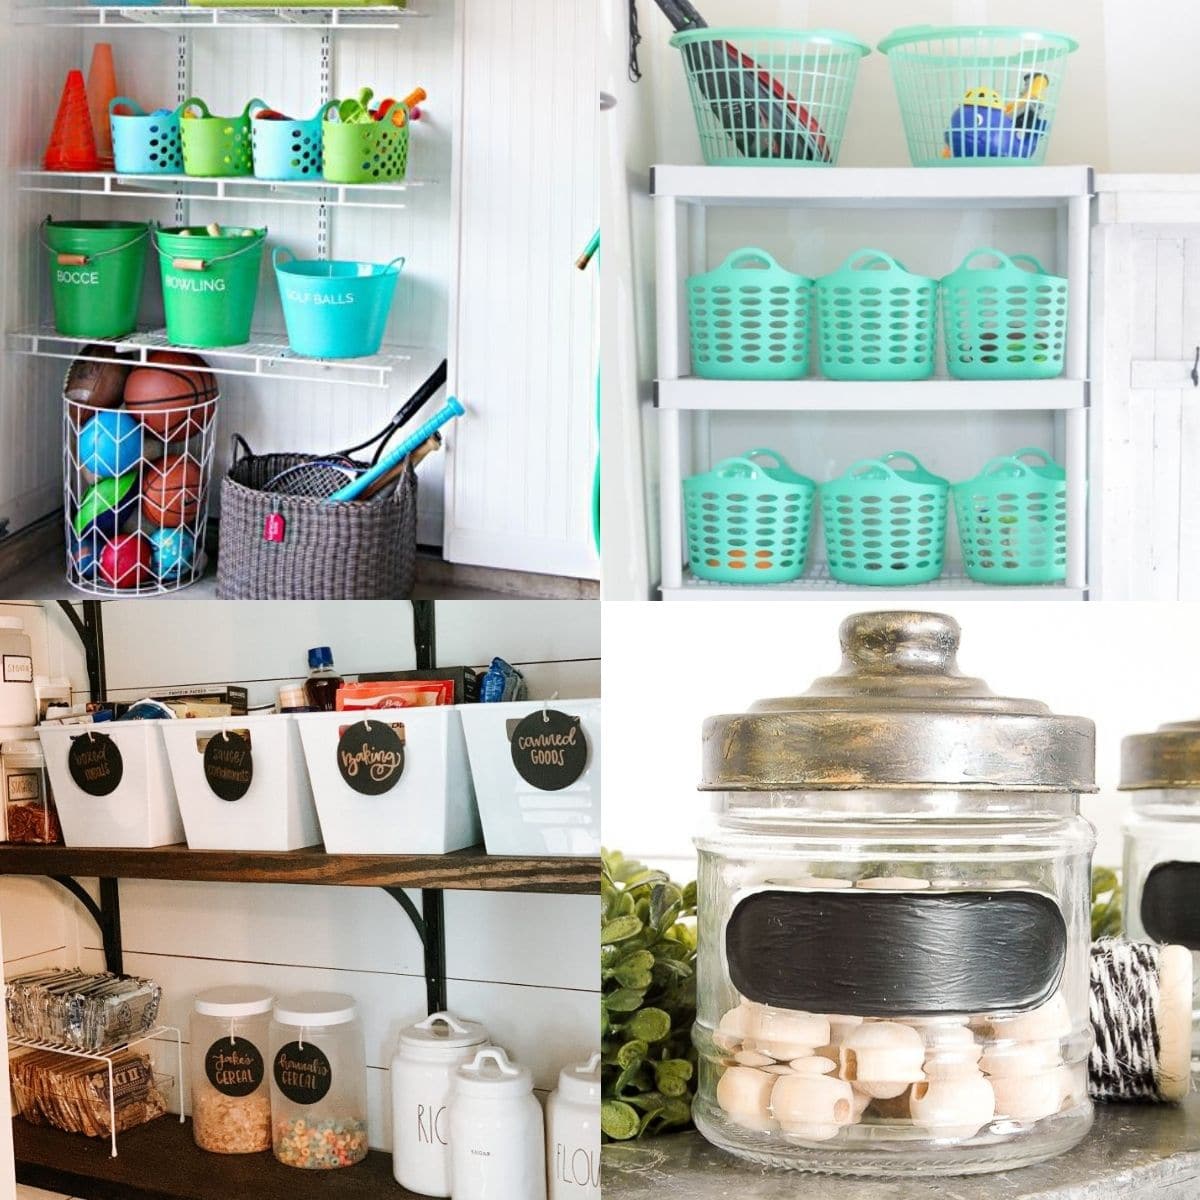 Increase storage with these Dollar Tree storage hacks.

These simple organizing tips are fun, budget-friendly, and look extra cute. 😉

#Storage #StorageIdeas #DollarTree #DollarTreeStorageIdeas
 #RealEstate
 LocalInfoForYou.com/60372/dollar-t…